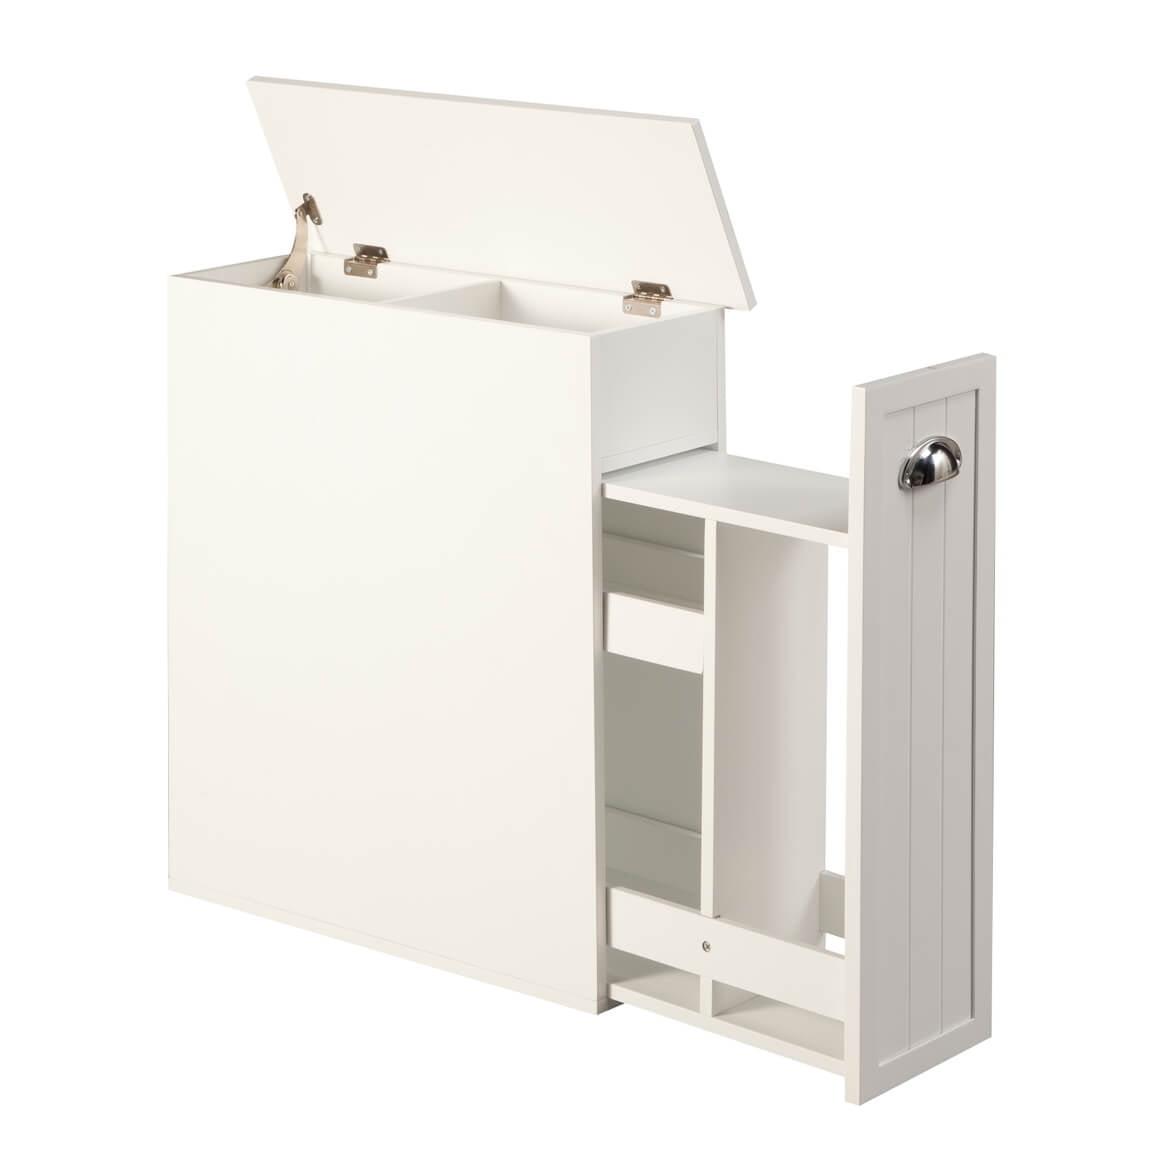 Classic White Slim Bathroom Storage Cabinet with Slide-Out Shelf